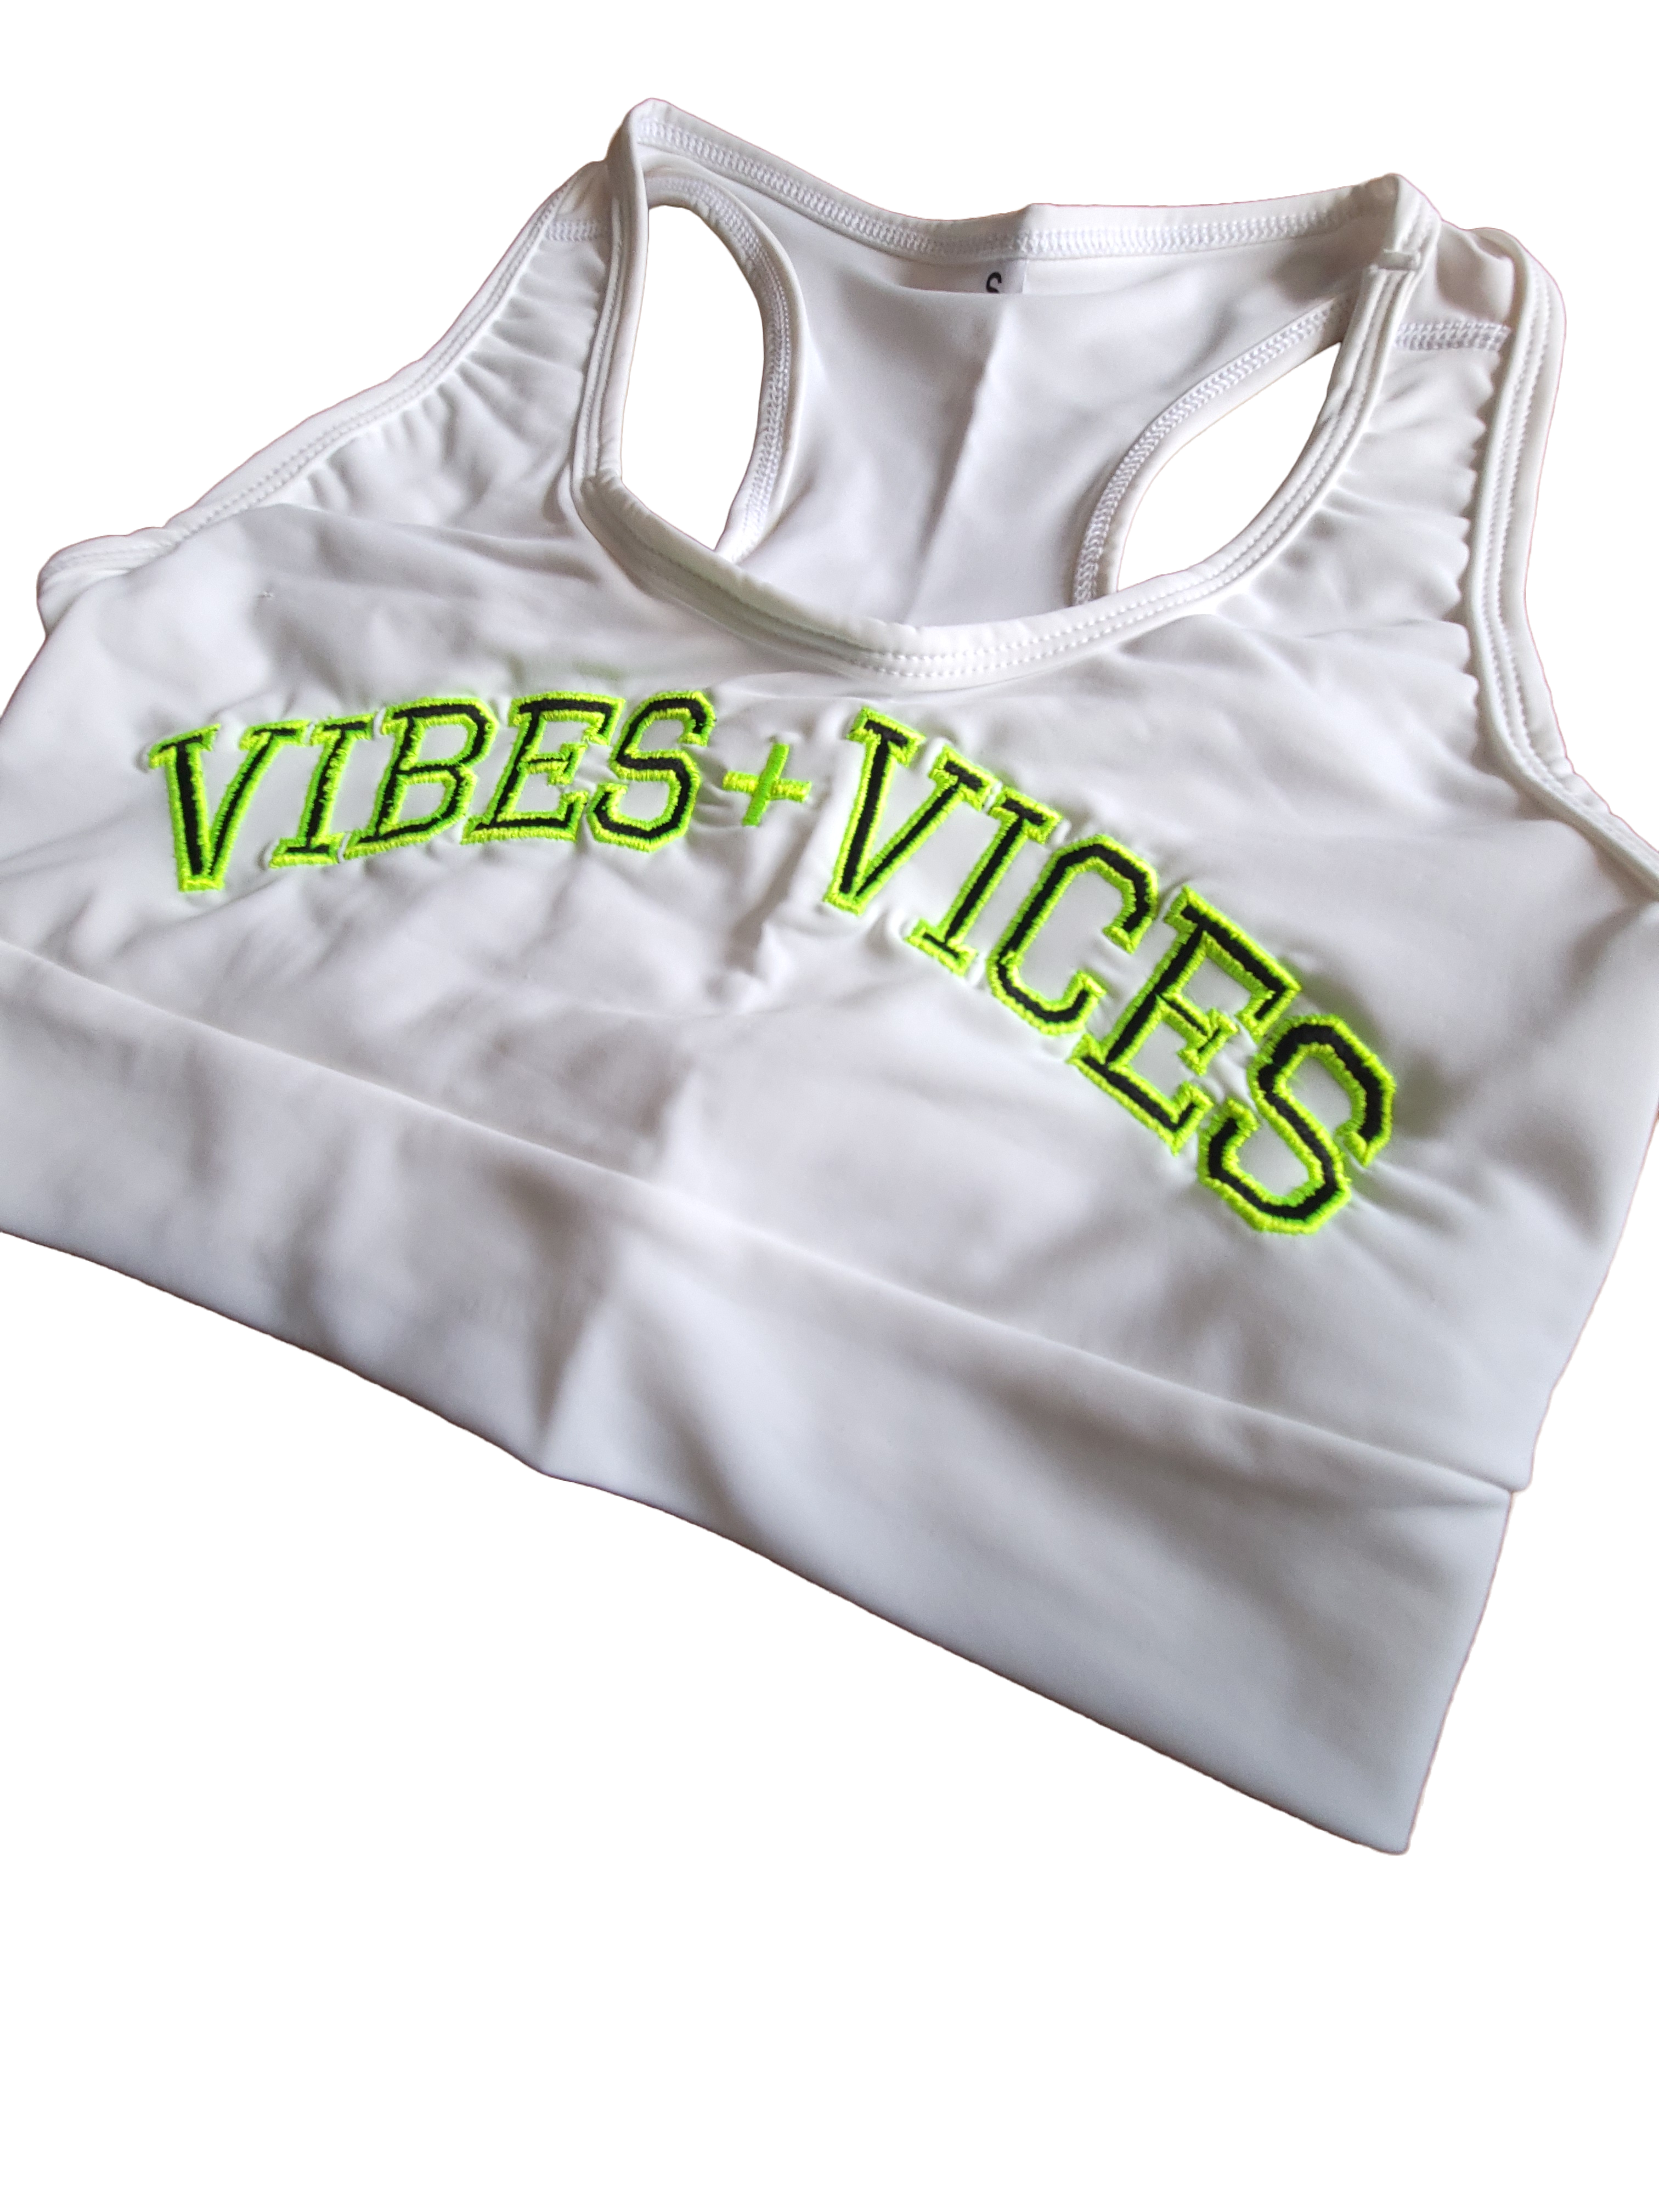 Vibes and Vices Sports Bra Sports Bra Small / White/Neon,3X-Large / White/Neon,2X-Large / White/Neon,X-Large / White/Neon,Large / White/Neon,Medium / White/Neon Gray